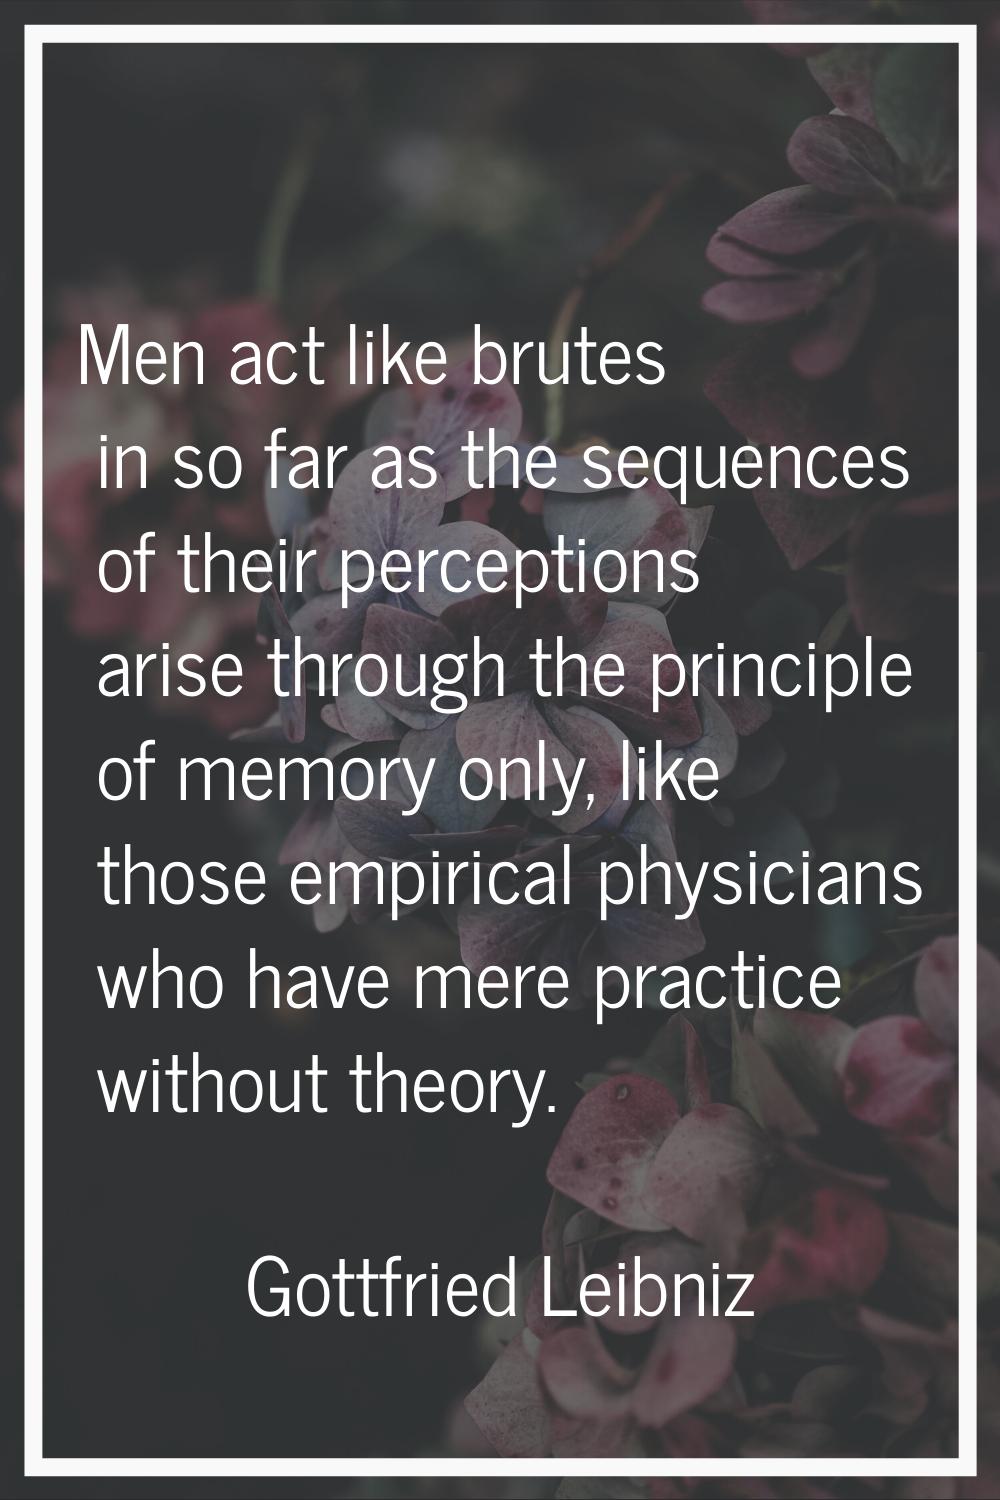 Men act like brutes in so far as the sequences of their perceptions arise through the principle of 